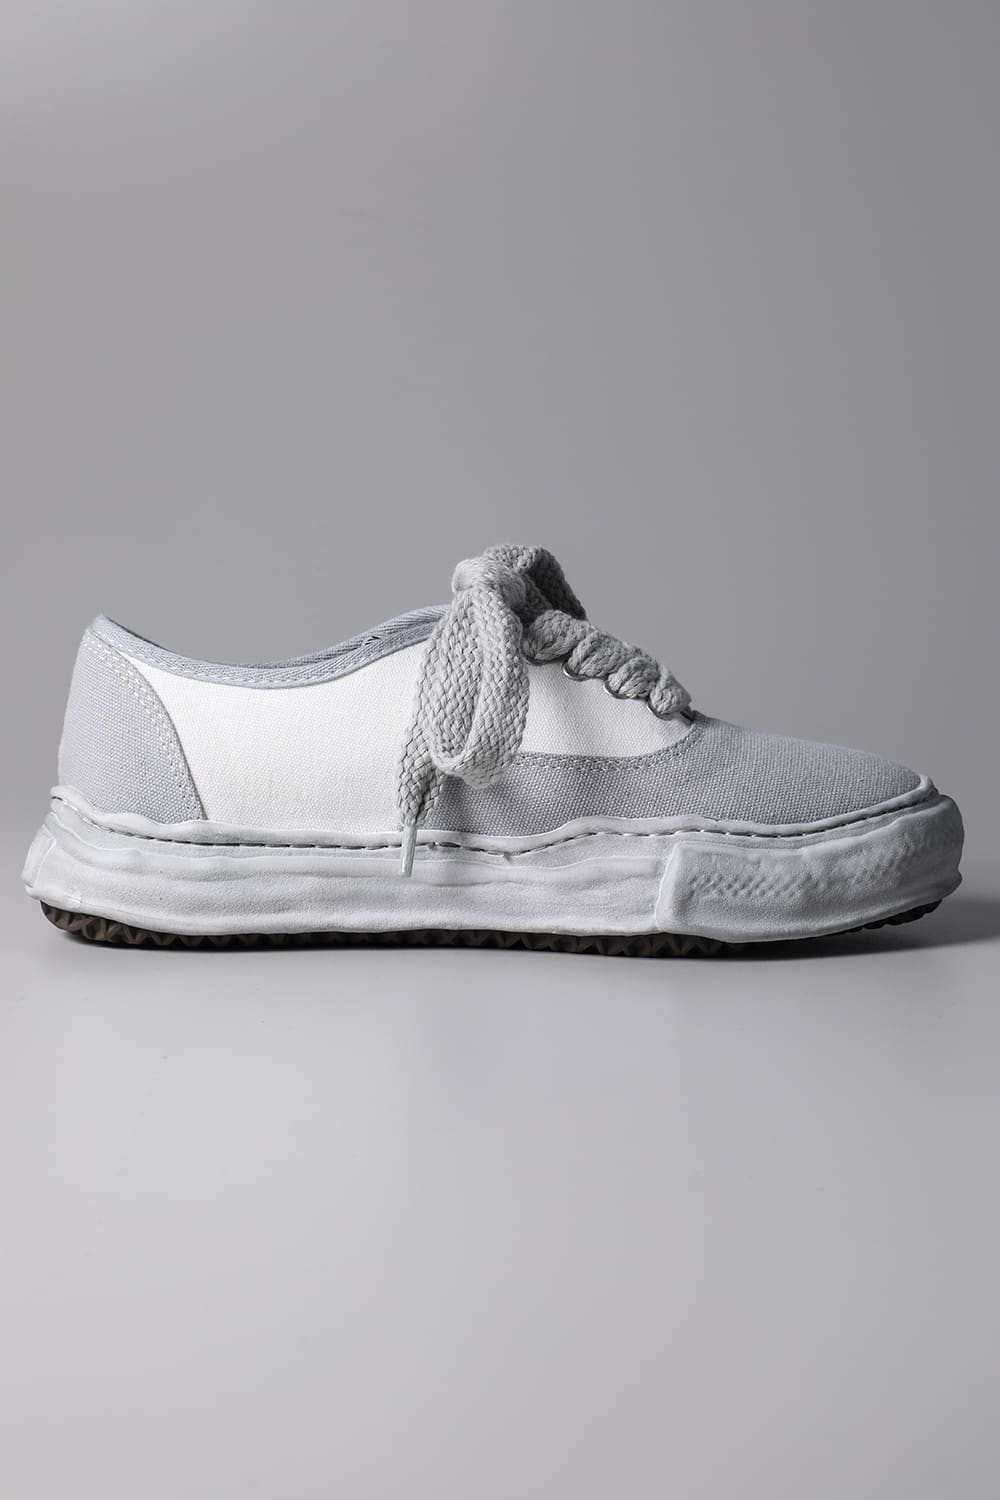 -BAKER- Original sole over-dyed canvas Low-Top sneakers White